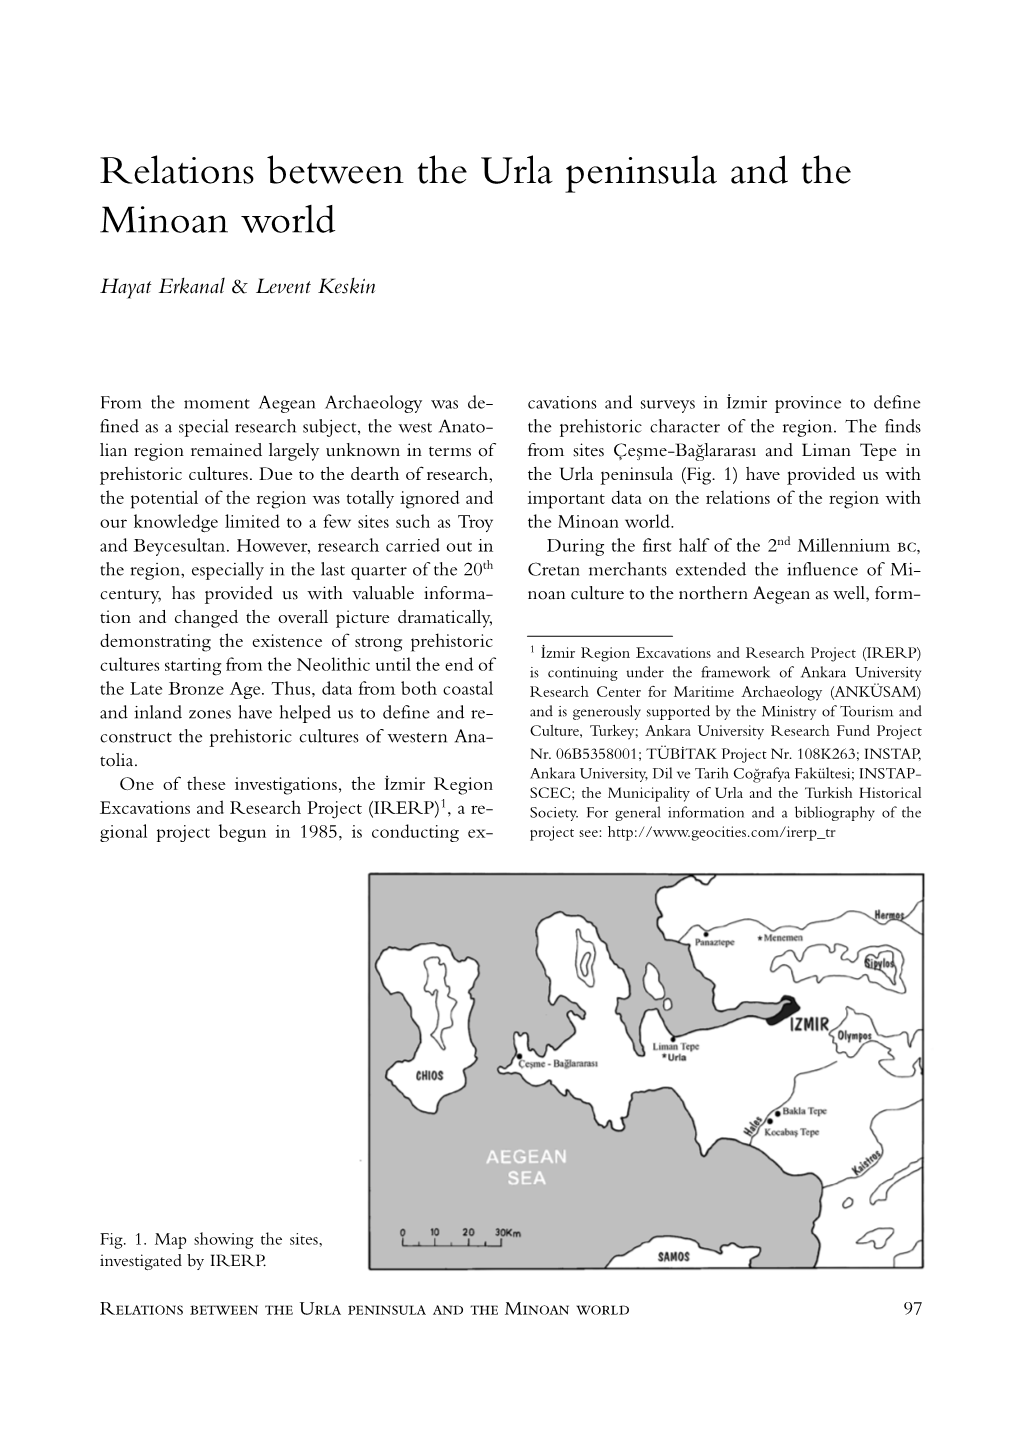 Relations Between the Urla Peninsula and the Minoan World